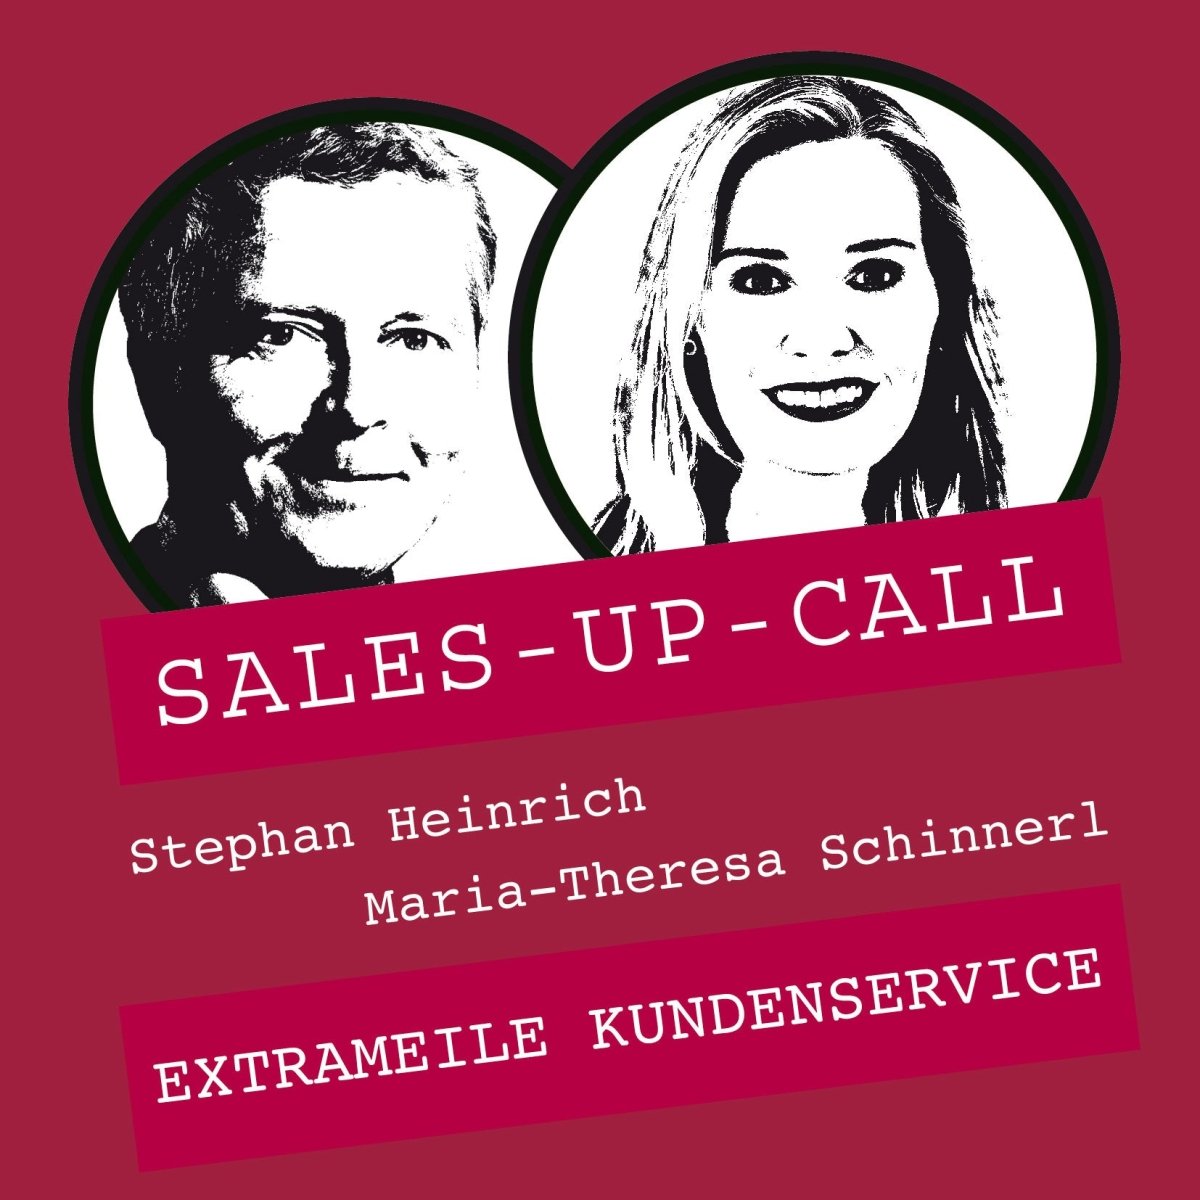 Extrameile Kundenservice - Sales-up-Call - Stephan Heinrich